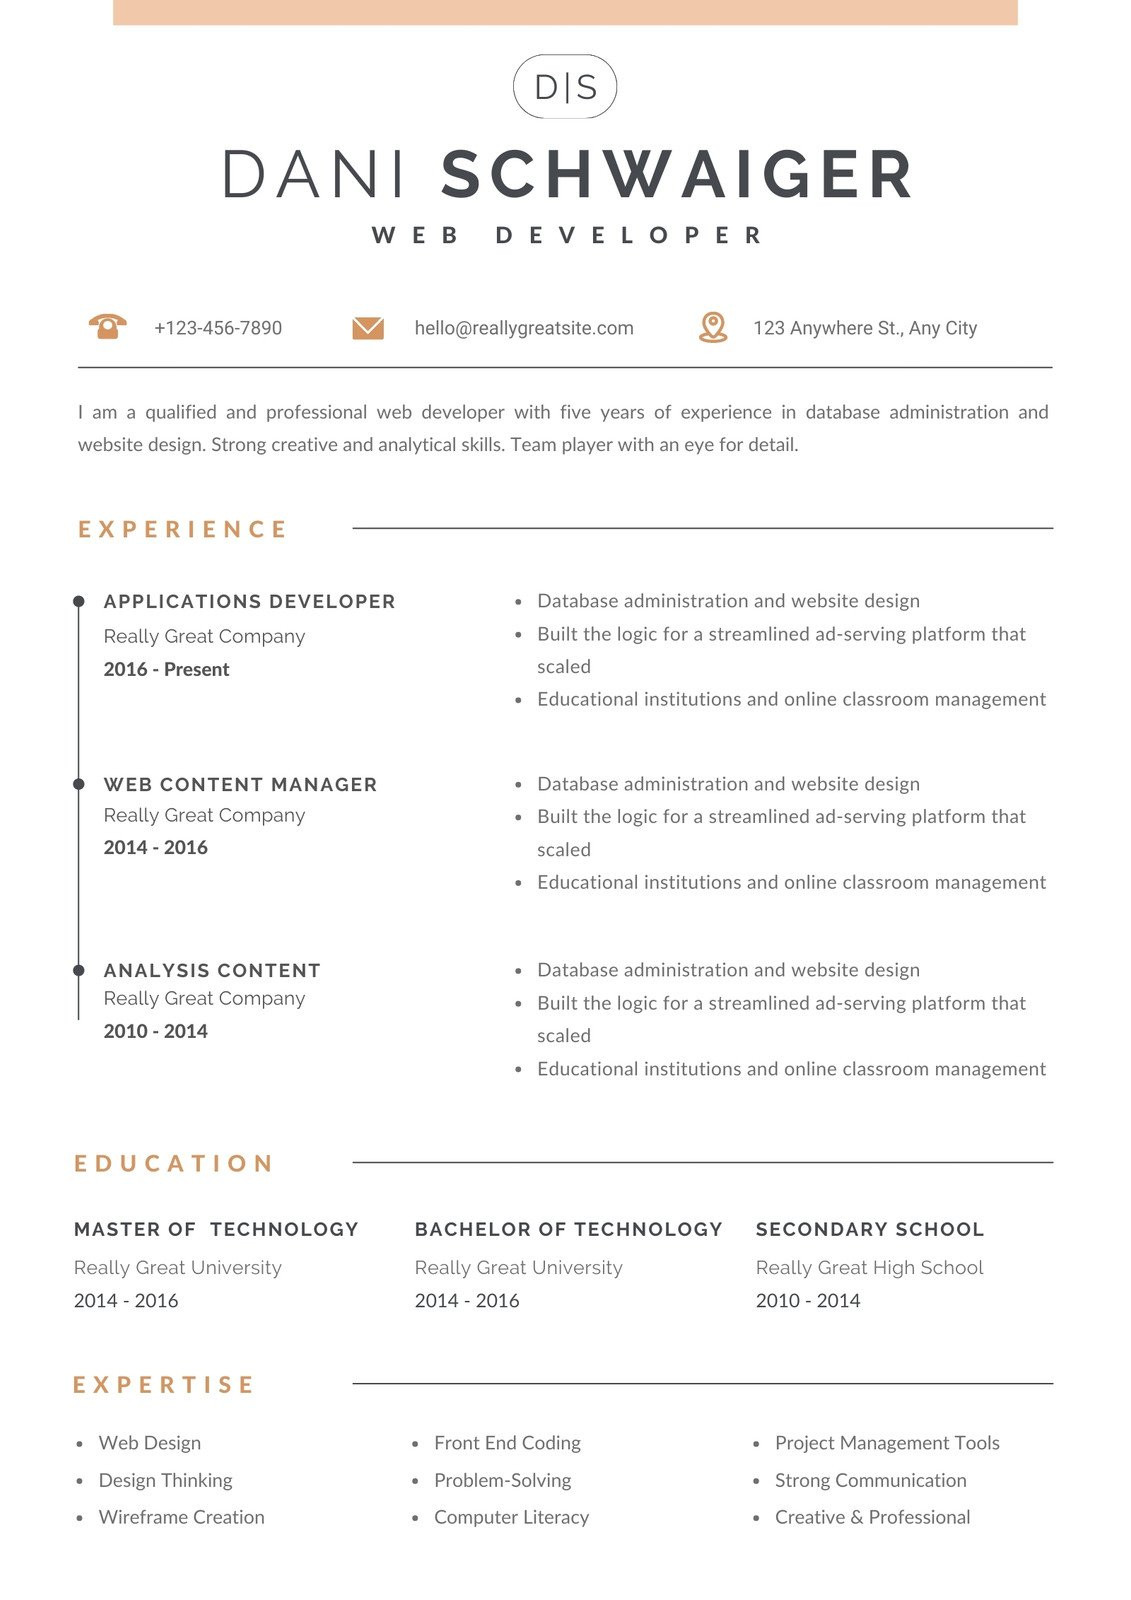 Sample Student Resume for College Admission Free Printable, Customizable College Resume Templates Canva